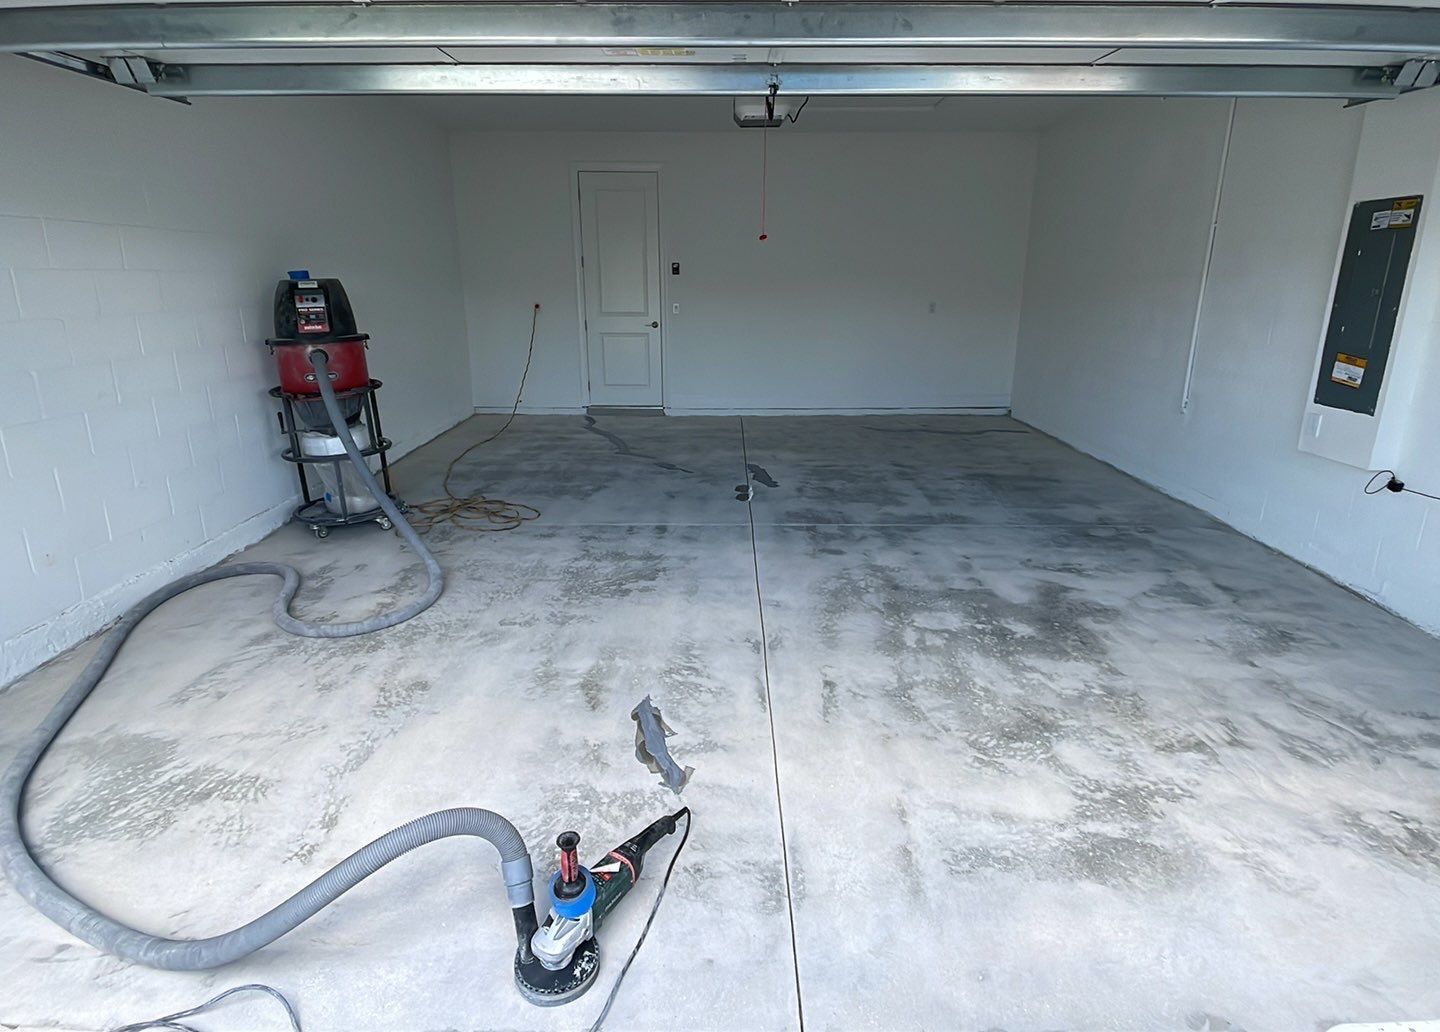 Interior of garage with concrete floor prepped by industrial grinder